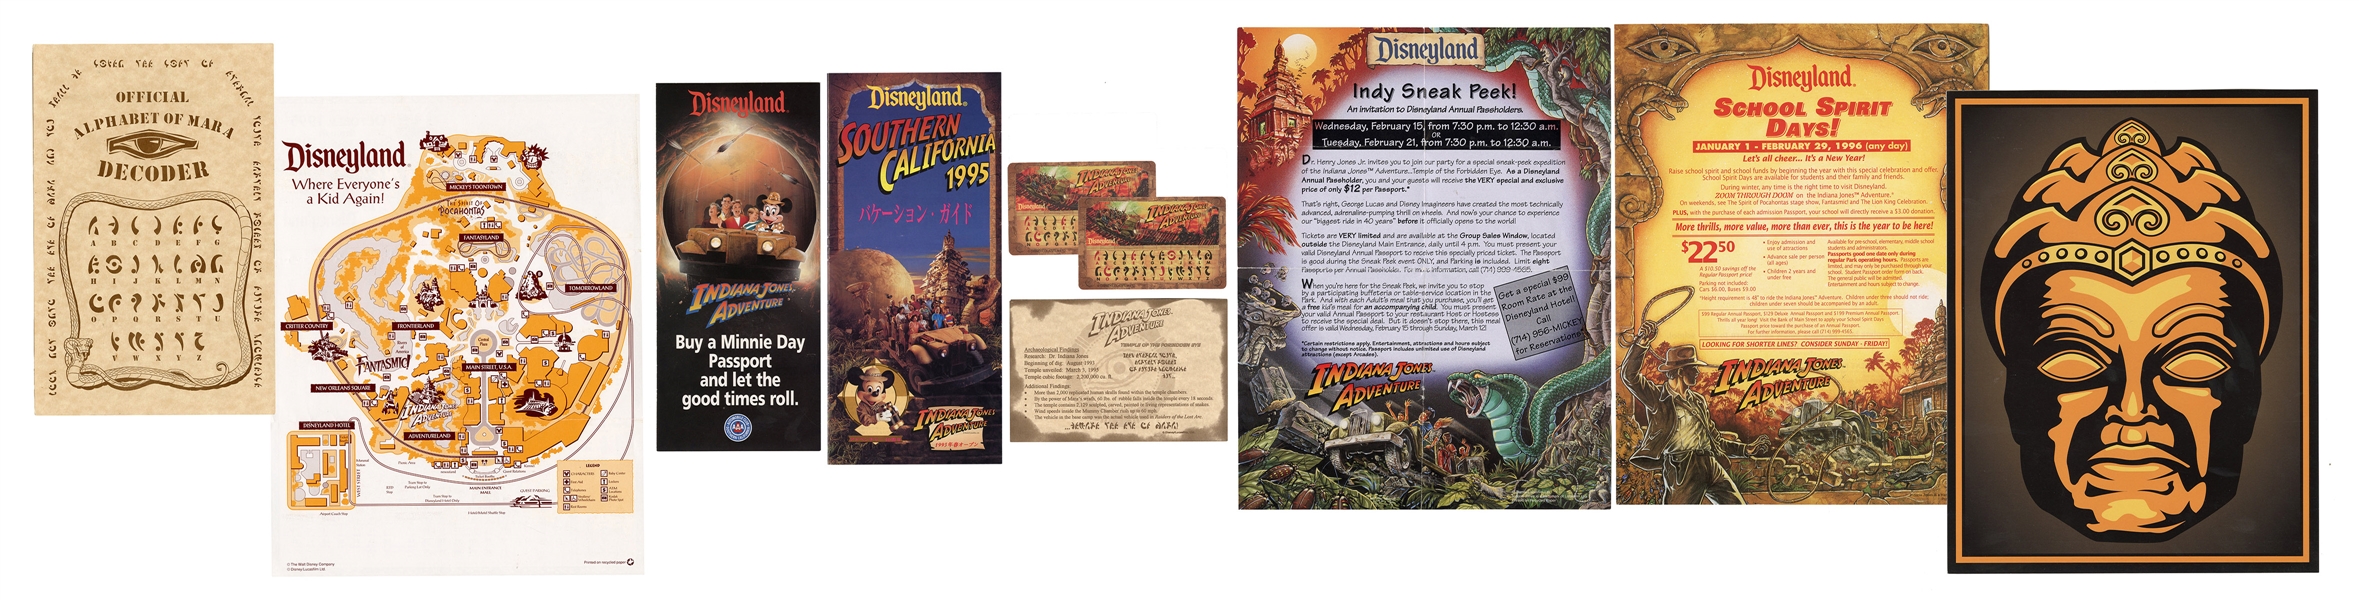 Assorted Paper Items Related to the Indiana Jones Adventure.